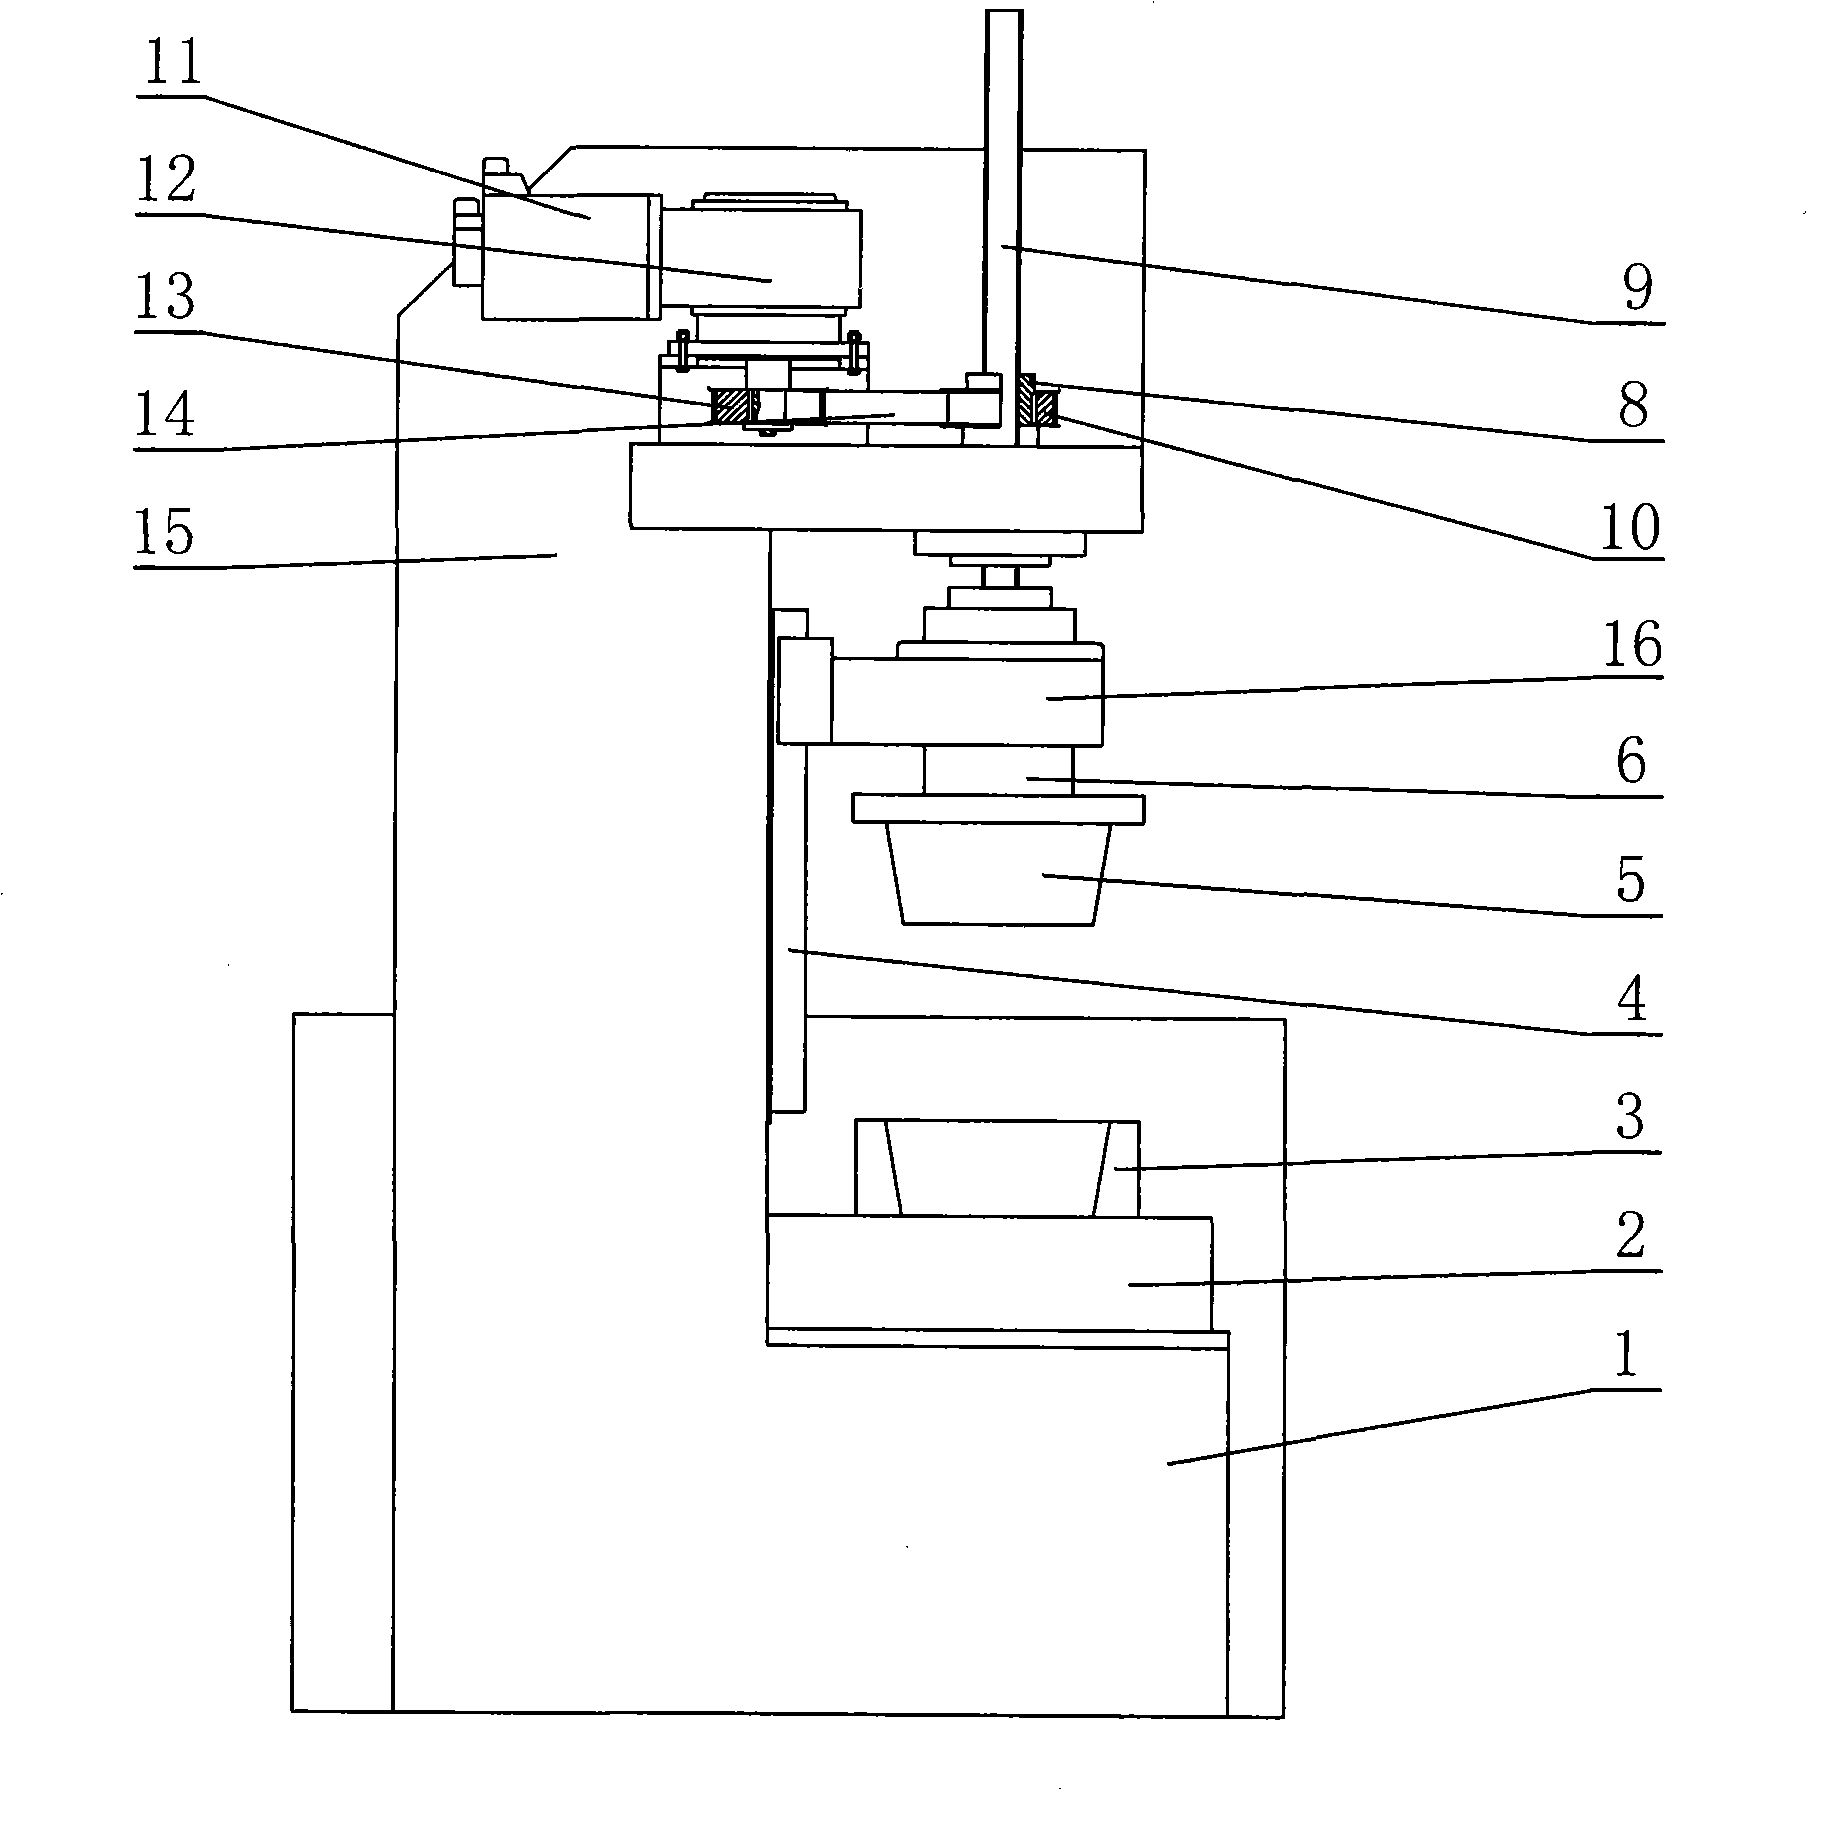 Die quenching machine tool for numerical control force measurement